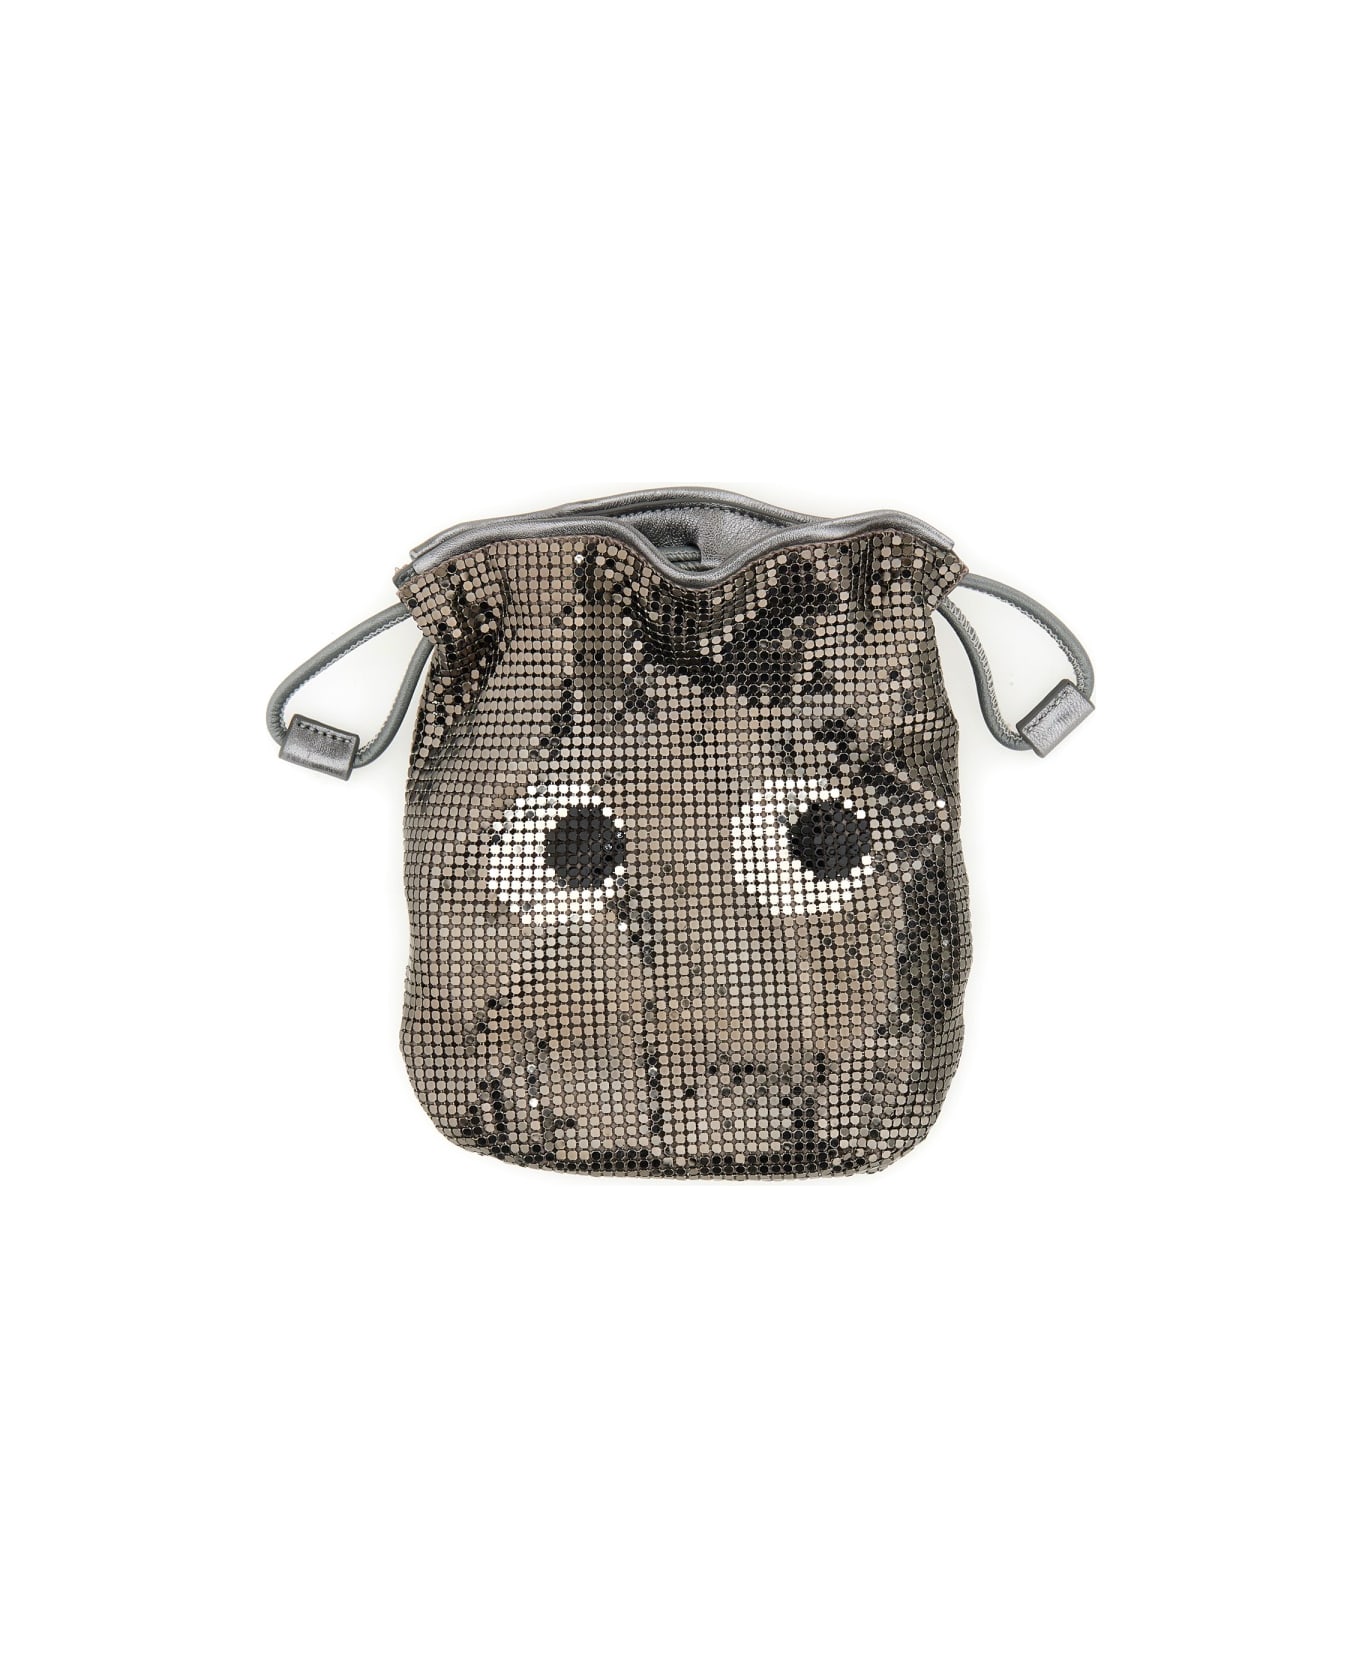 Anya Hindmarch Pouch In Mesh - CHARCOAL